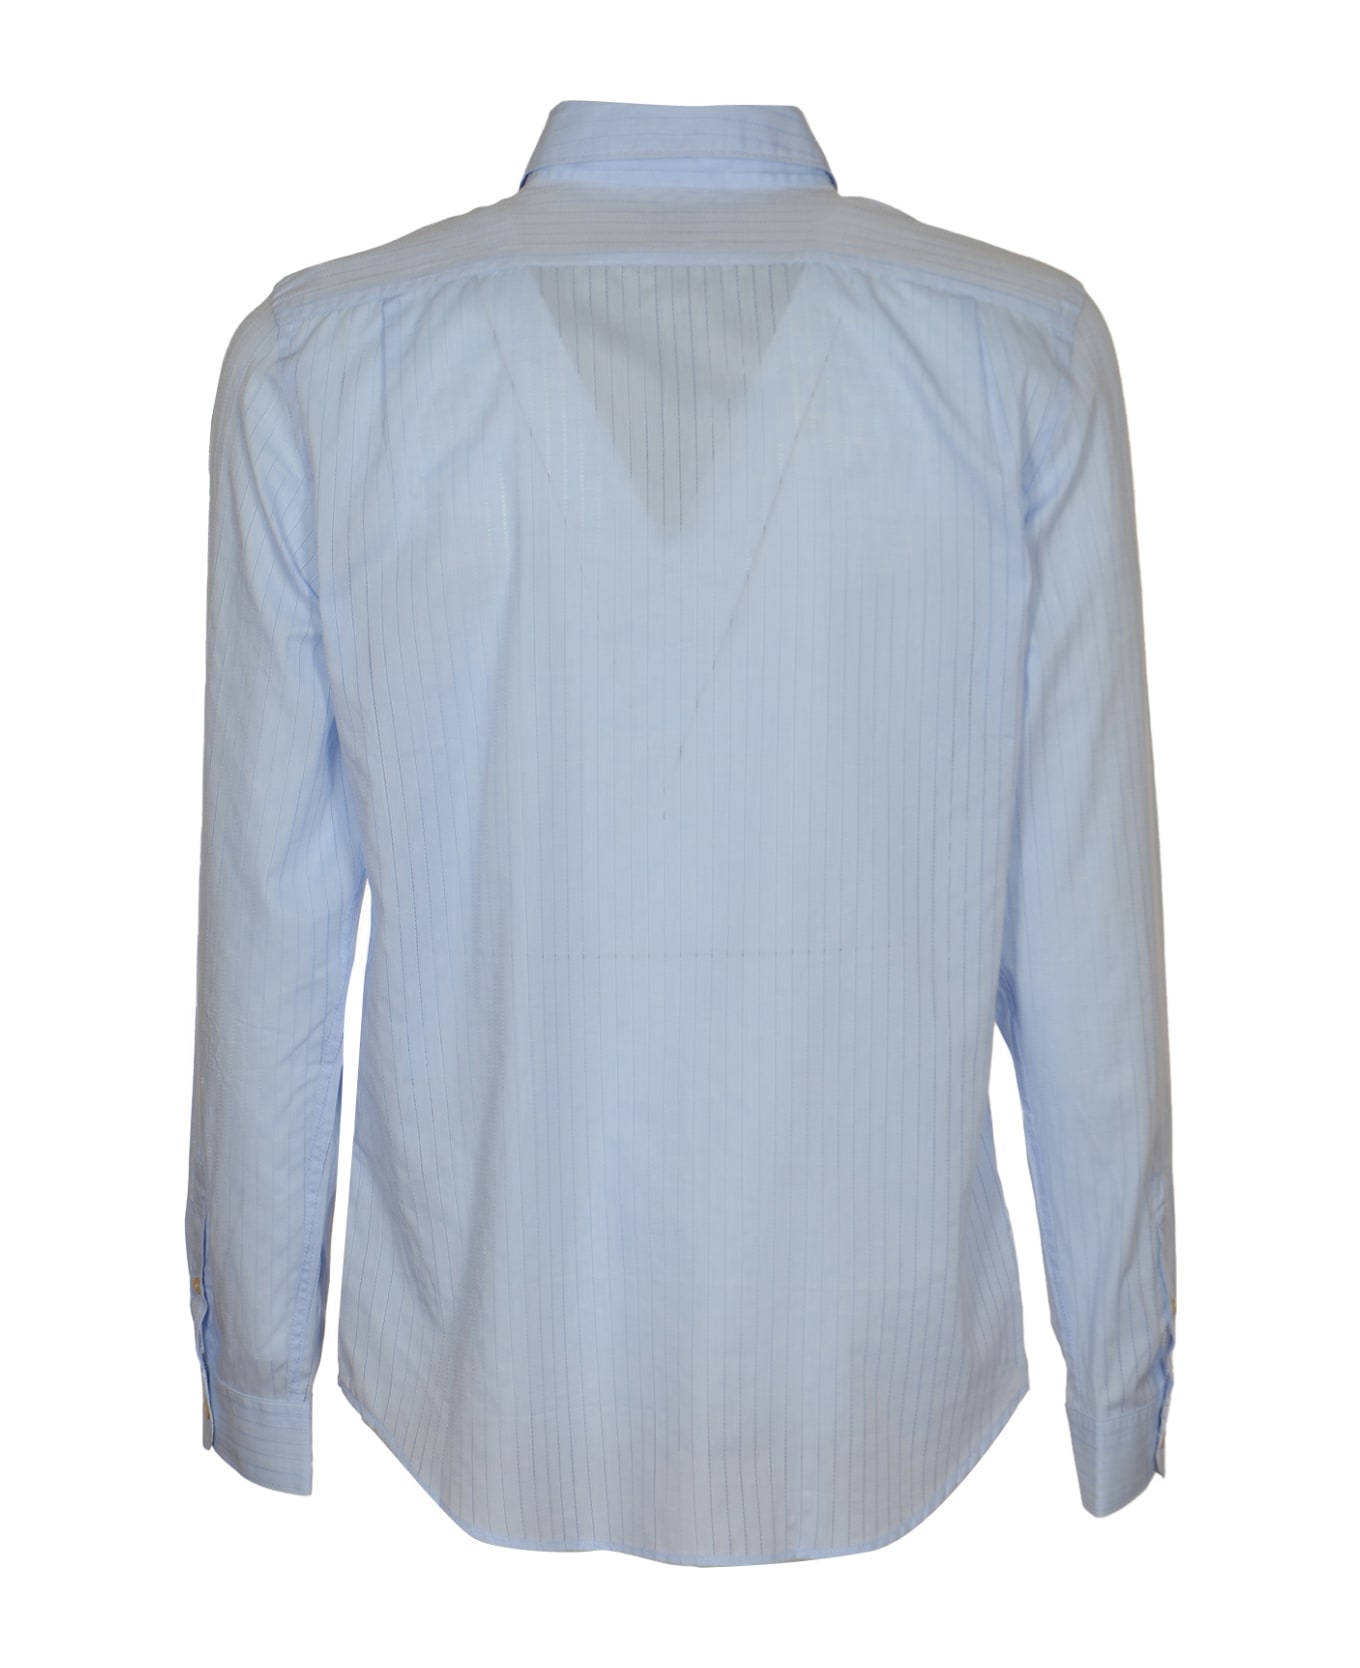 Paul Smith Tailored Fit Striped Shirt - Light Blue